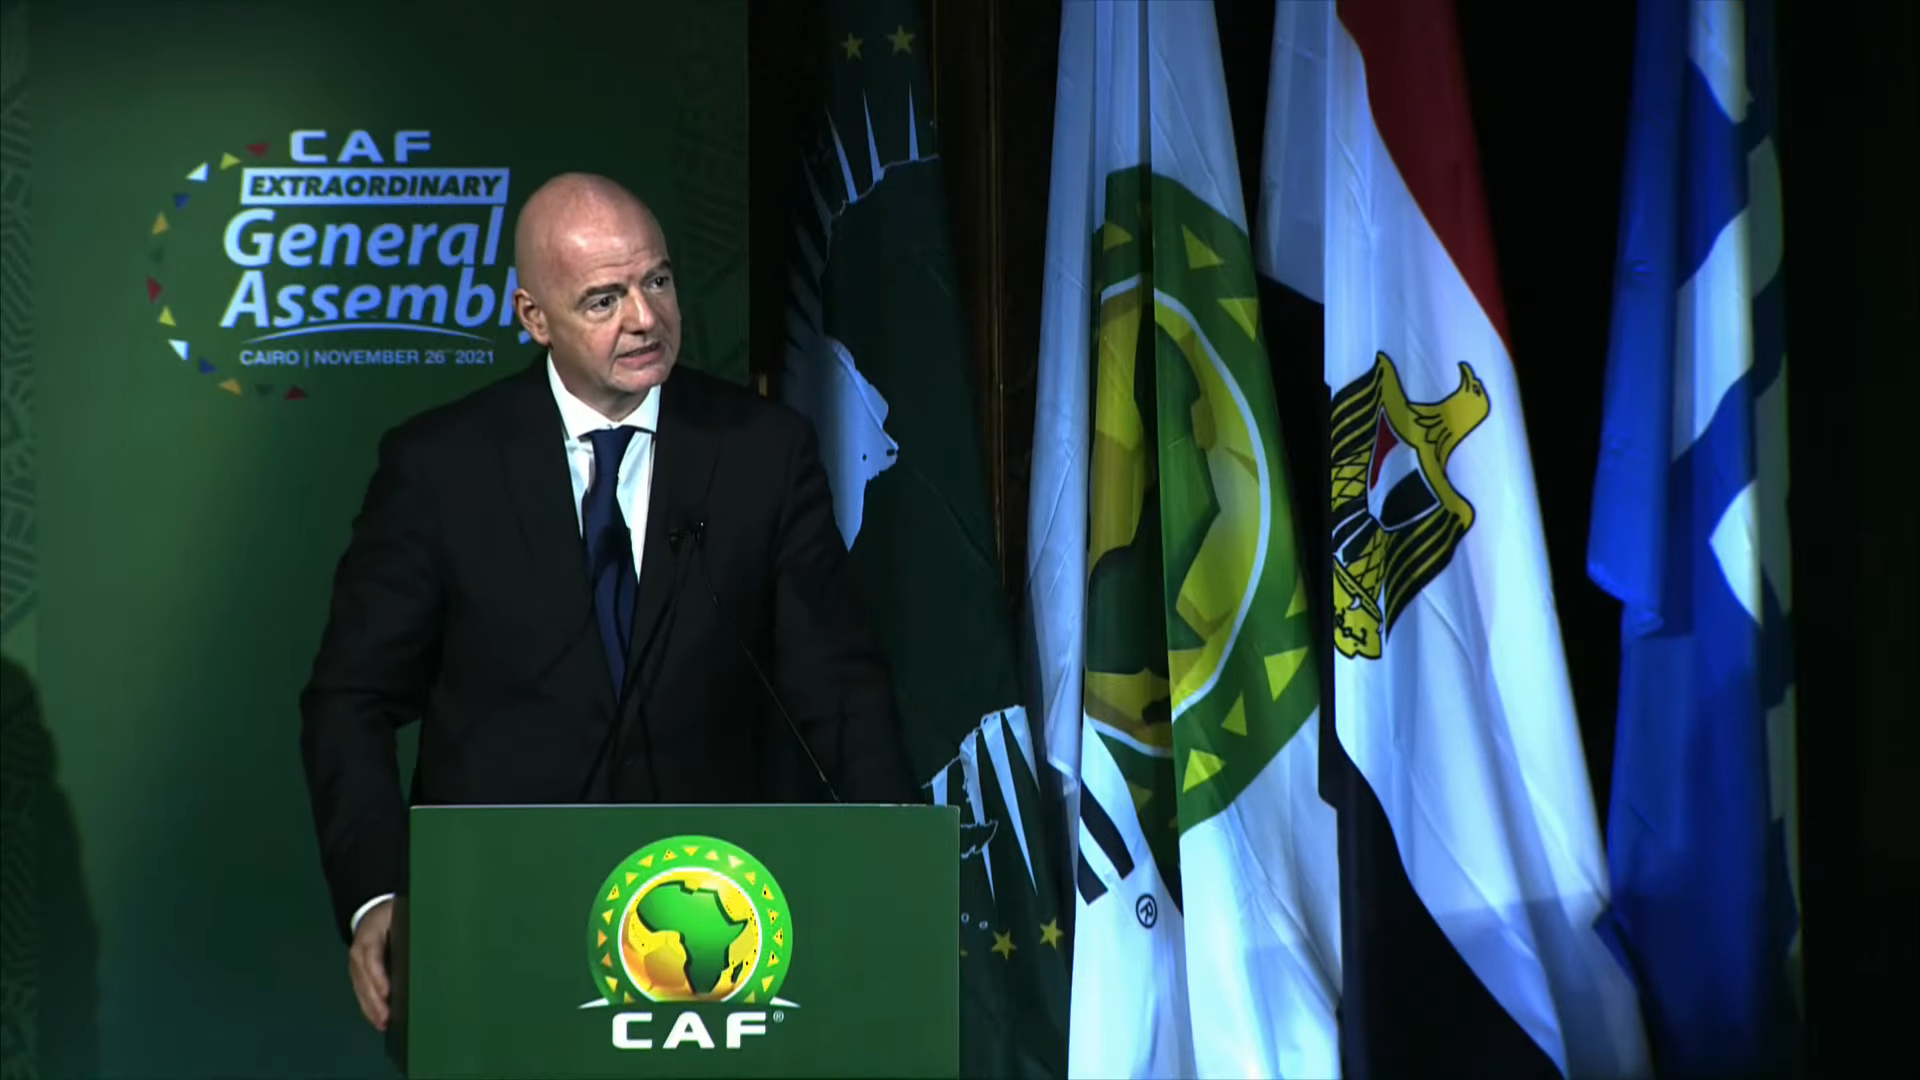 CAF confirms support for biennial FIFA World Cups and African Super League at General Assembly